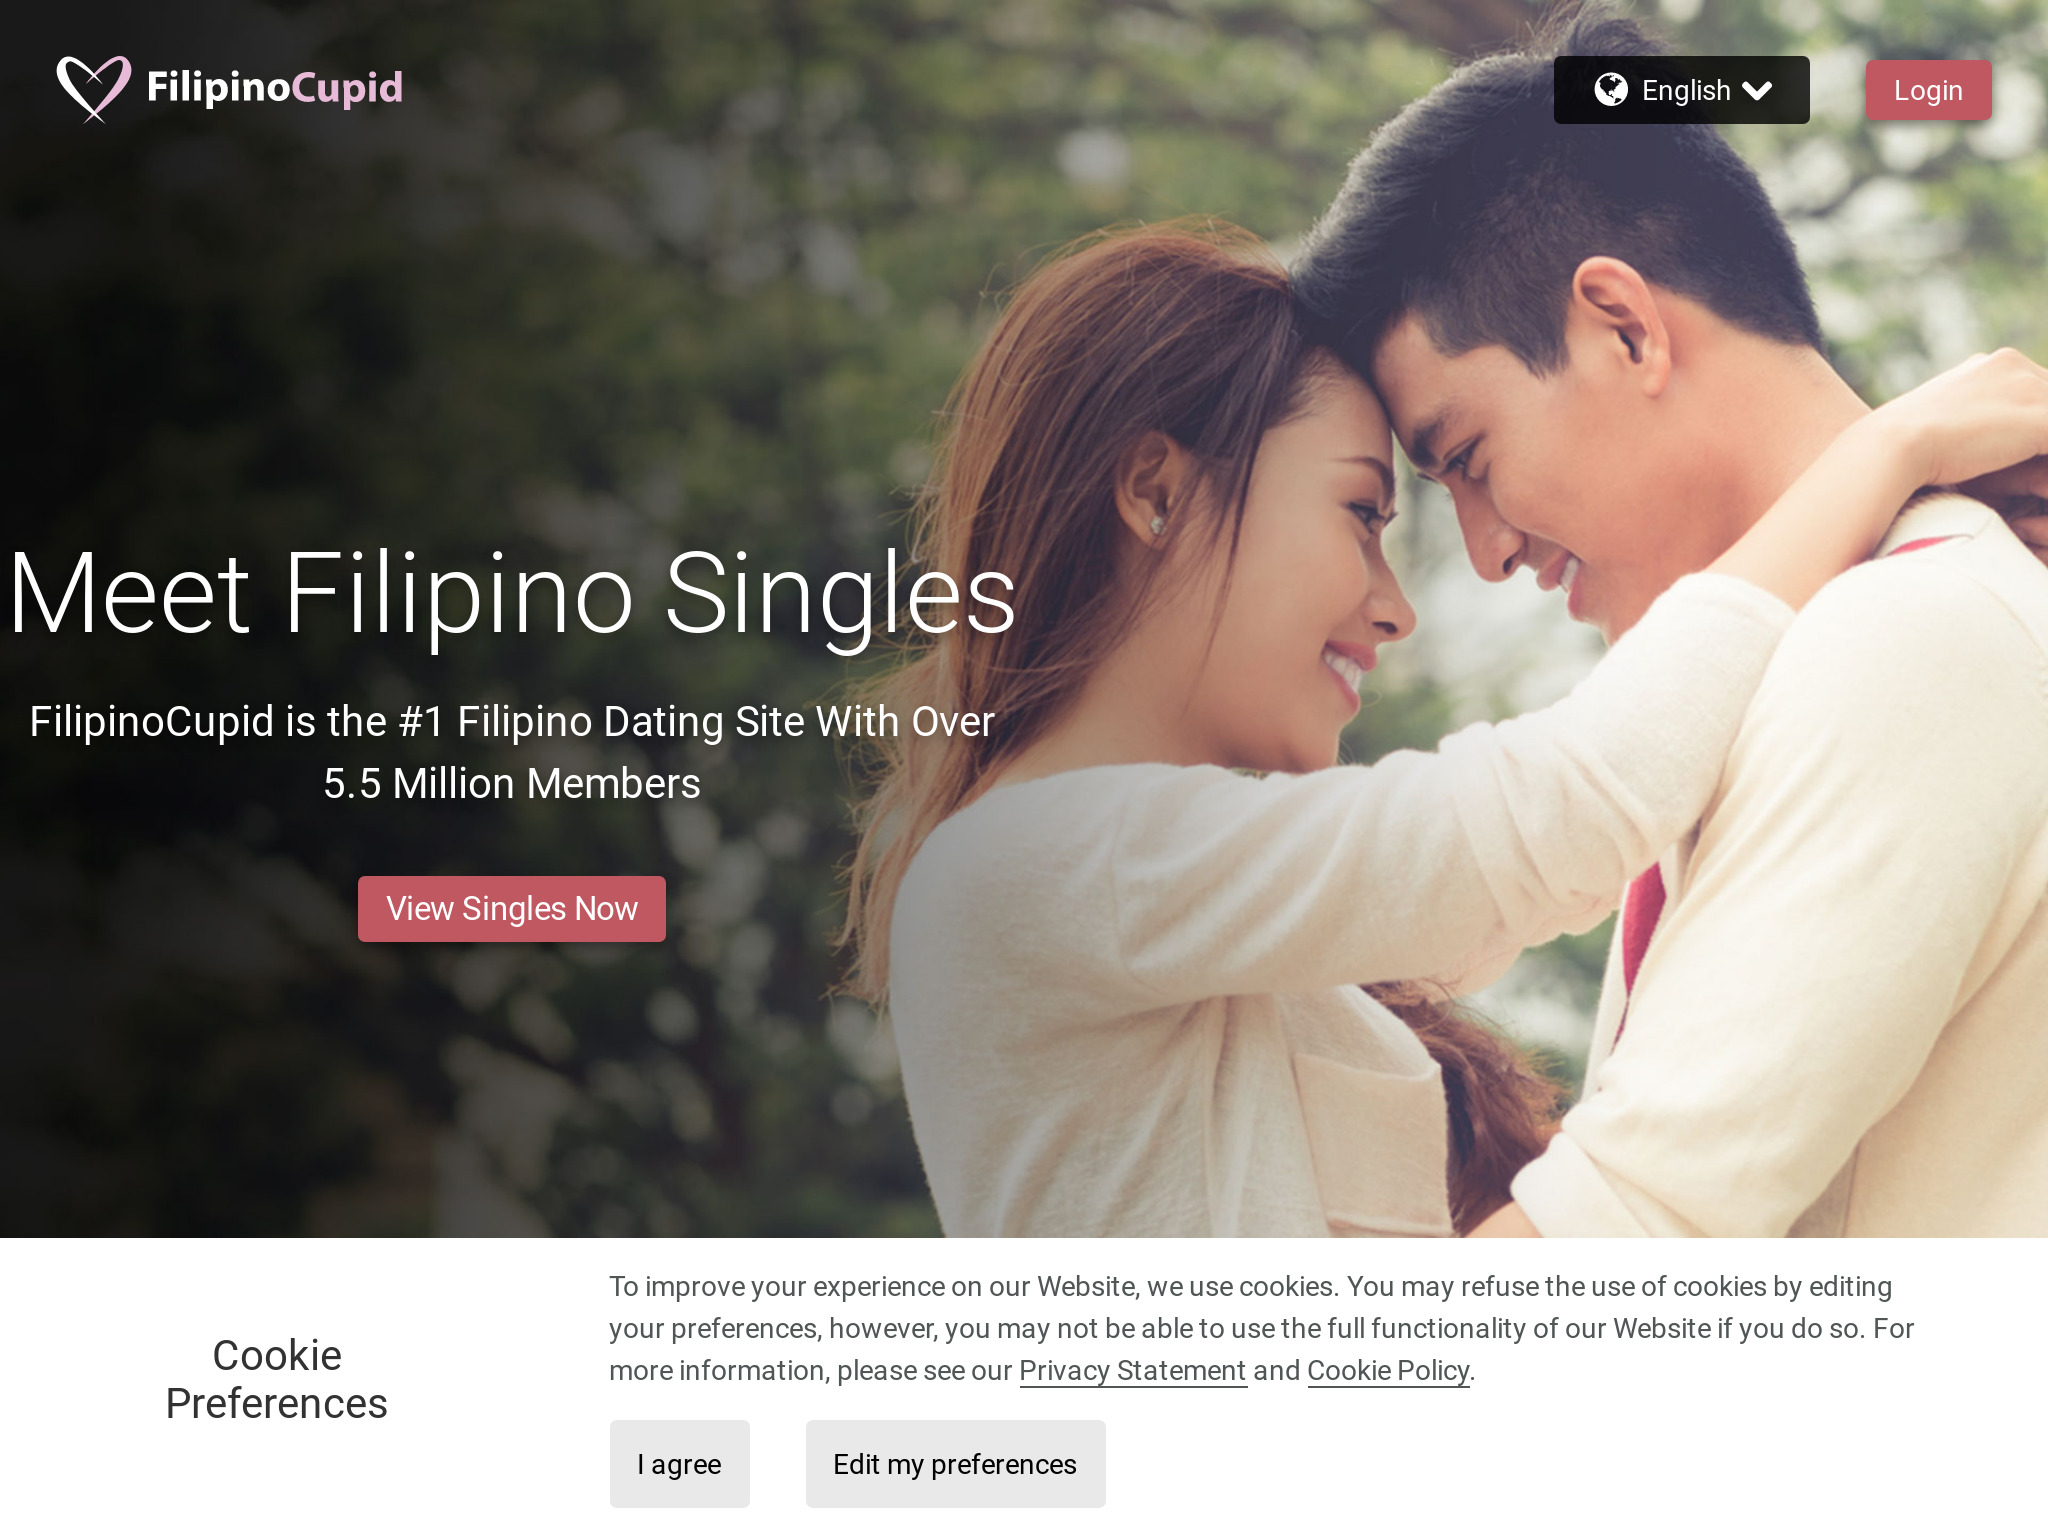 FilipinoCupid Review: Get The Facts Before You Sign Up!